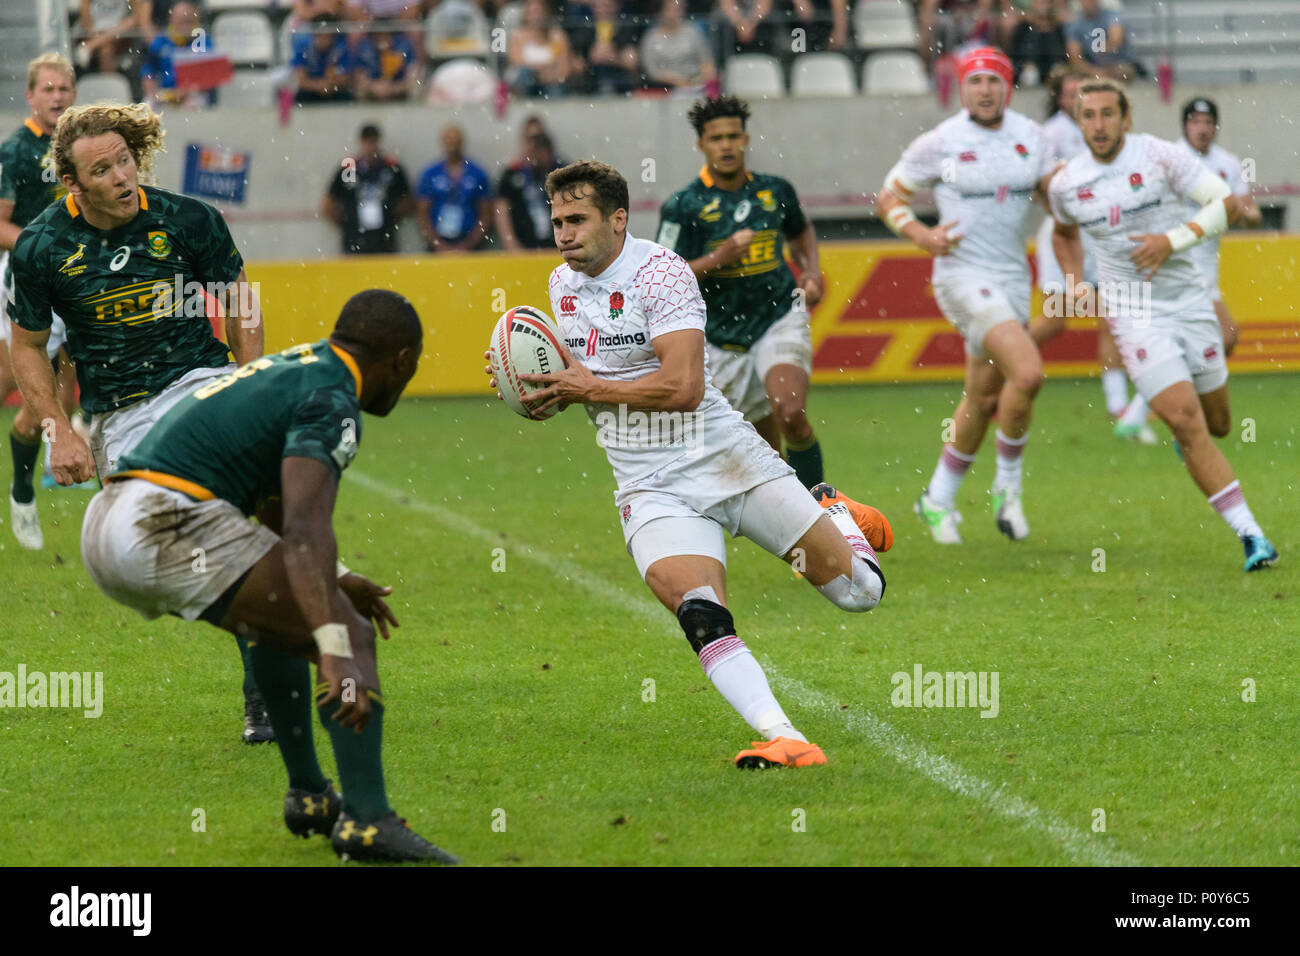 Paris, France. 10th Jun, 2018. England offense (here Oliver Lindsey Hague) has hard time going through South Africa defense during the loss in final of the HSBC Paris Sevens Series. South Africa will win both the tournament and the 2018 Sevens World Series, Paris, France, June 10th 2018. Stock Photo